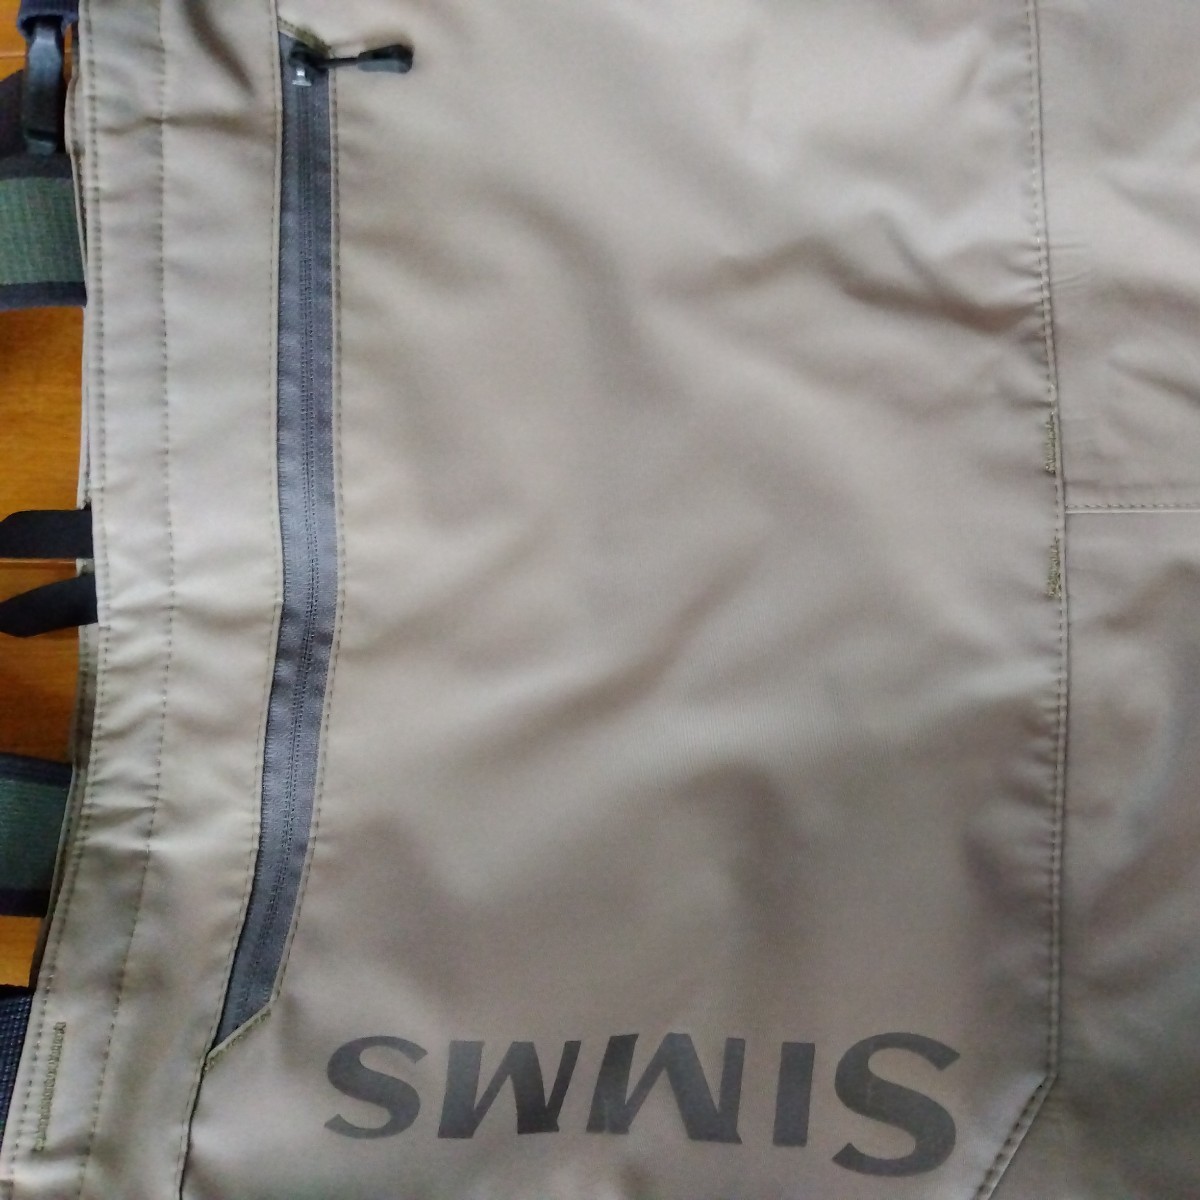 Simms Tributary Stockingfoottolibyuto Lee stockings foot Syms waders TAN US:M US9-11